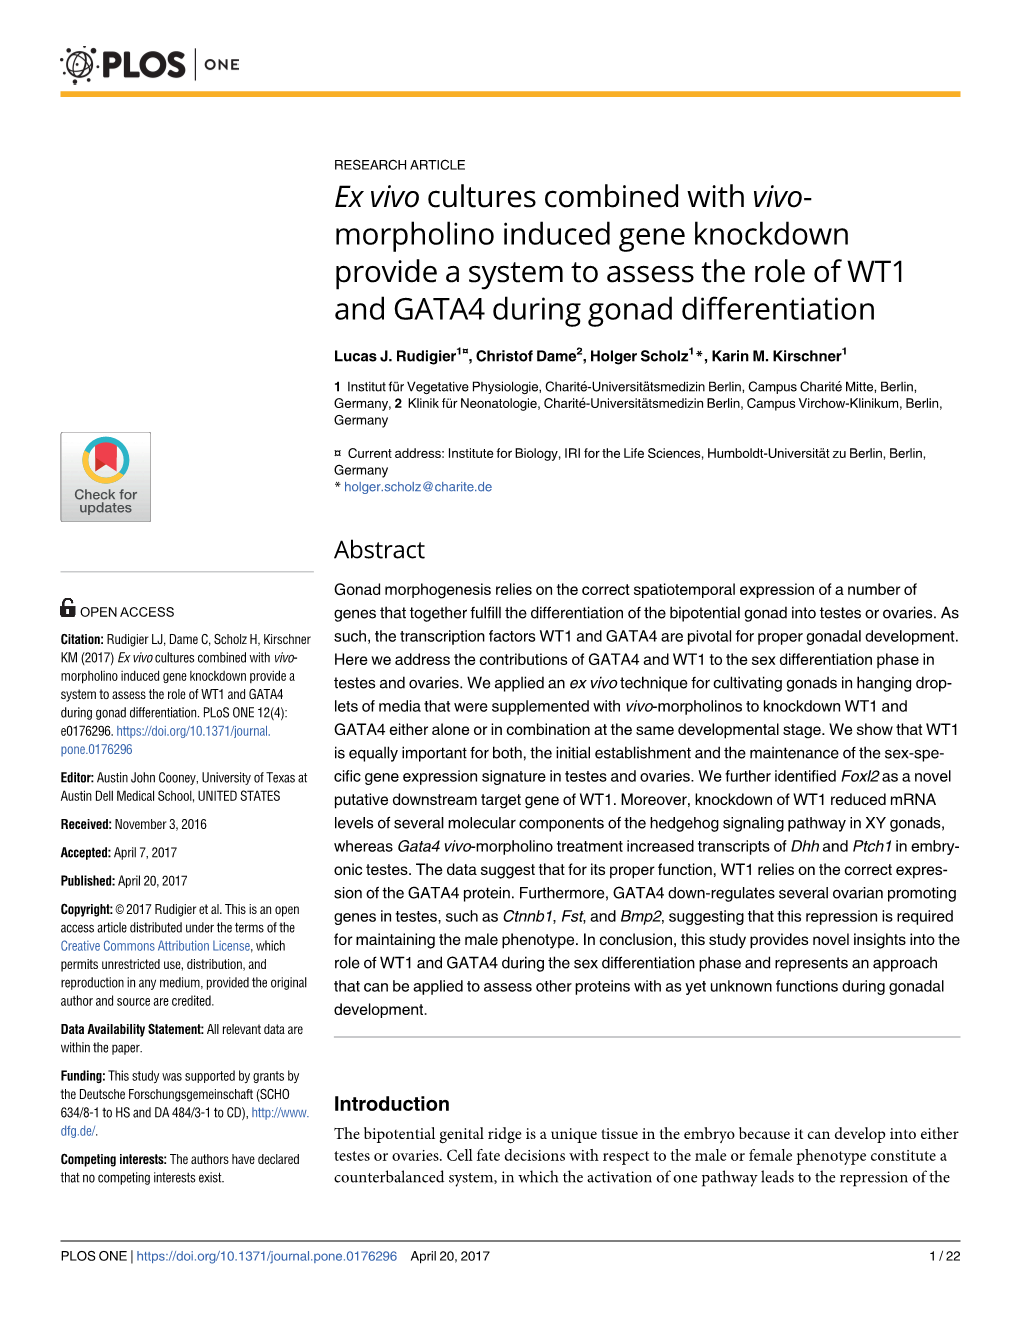 Ex Vivo Cultures Combined with Vivo-Morpholino Induced Gene